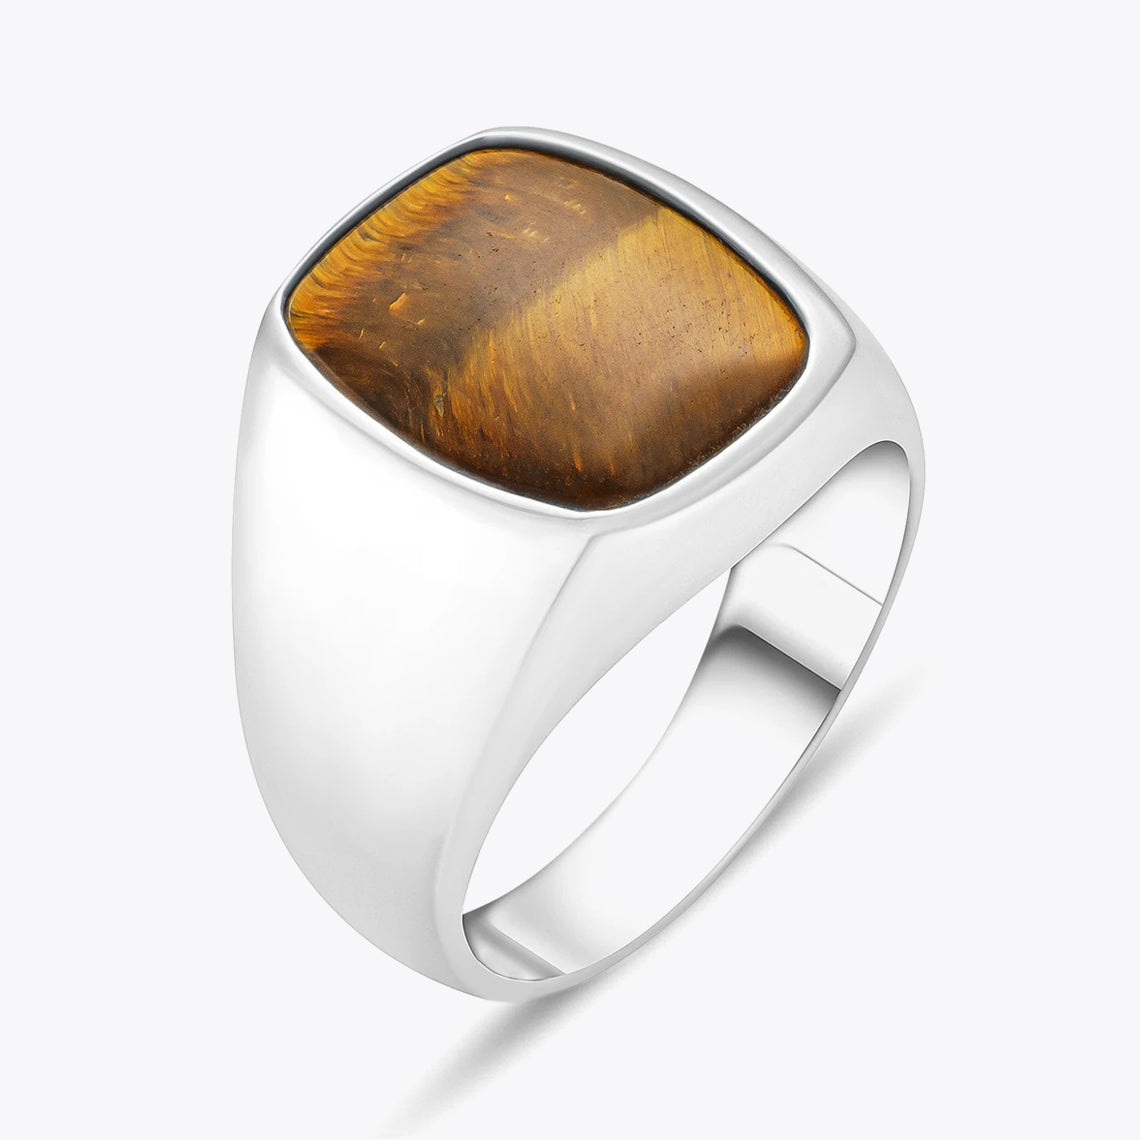 Silver Men's Ring with Tiger Eye Stone - 925 Sterling Silver